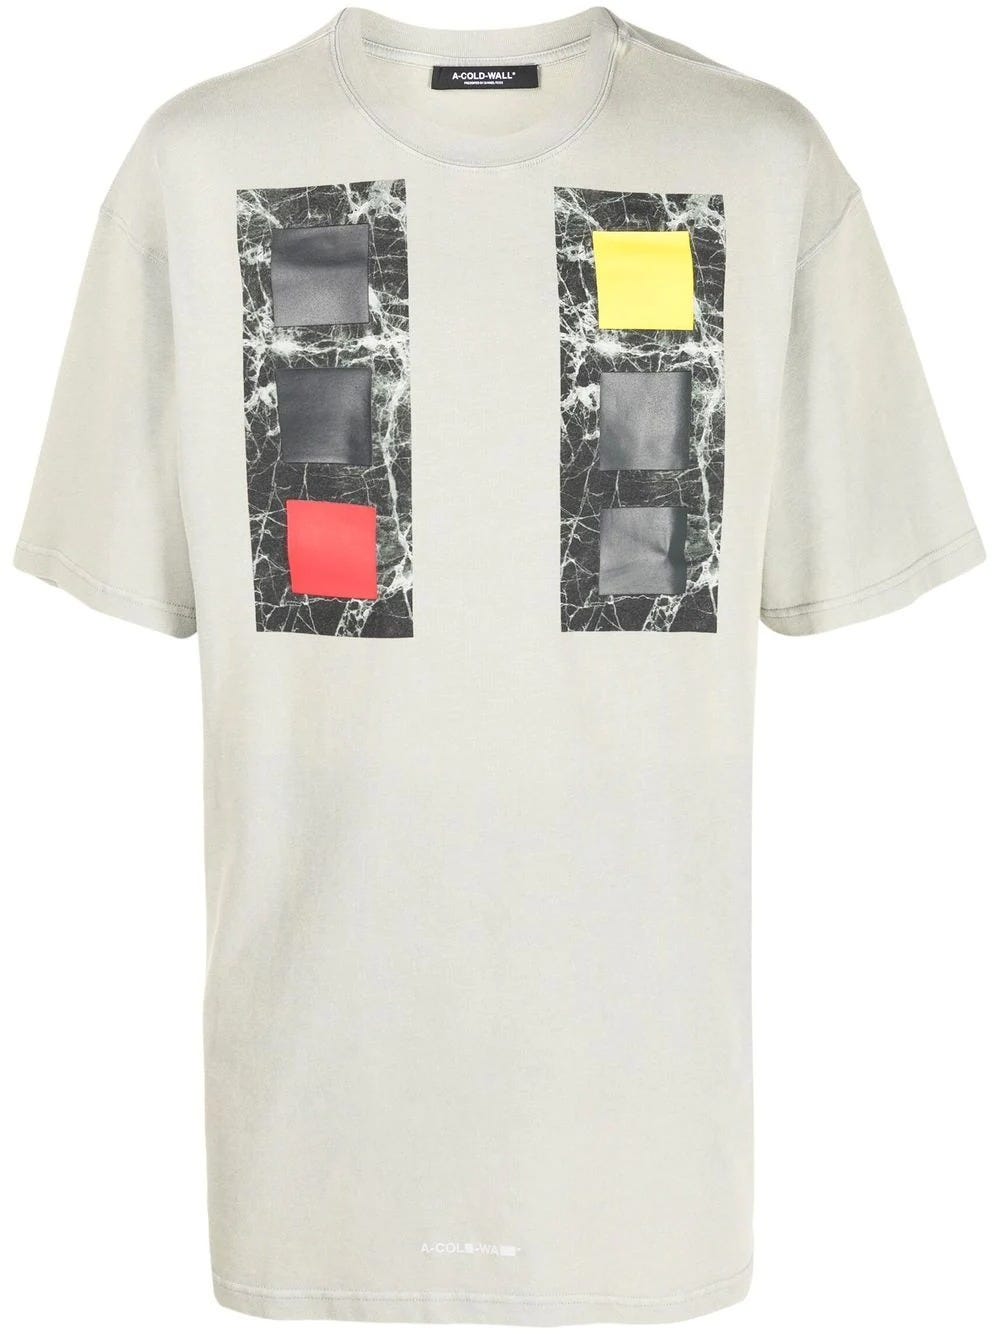 A-COLD-WALL* A-COLD-WALL* CUBIST SHORT-SLEEVED T-SHIRT